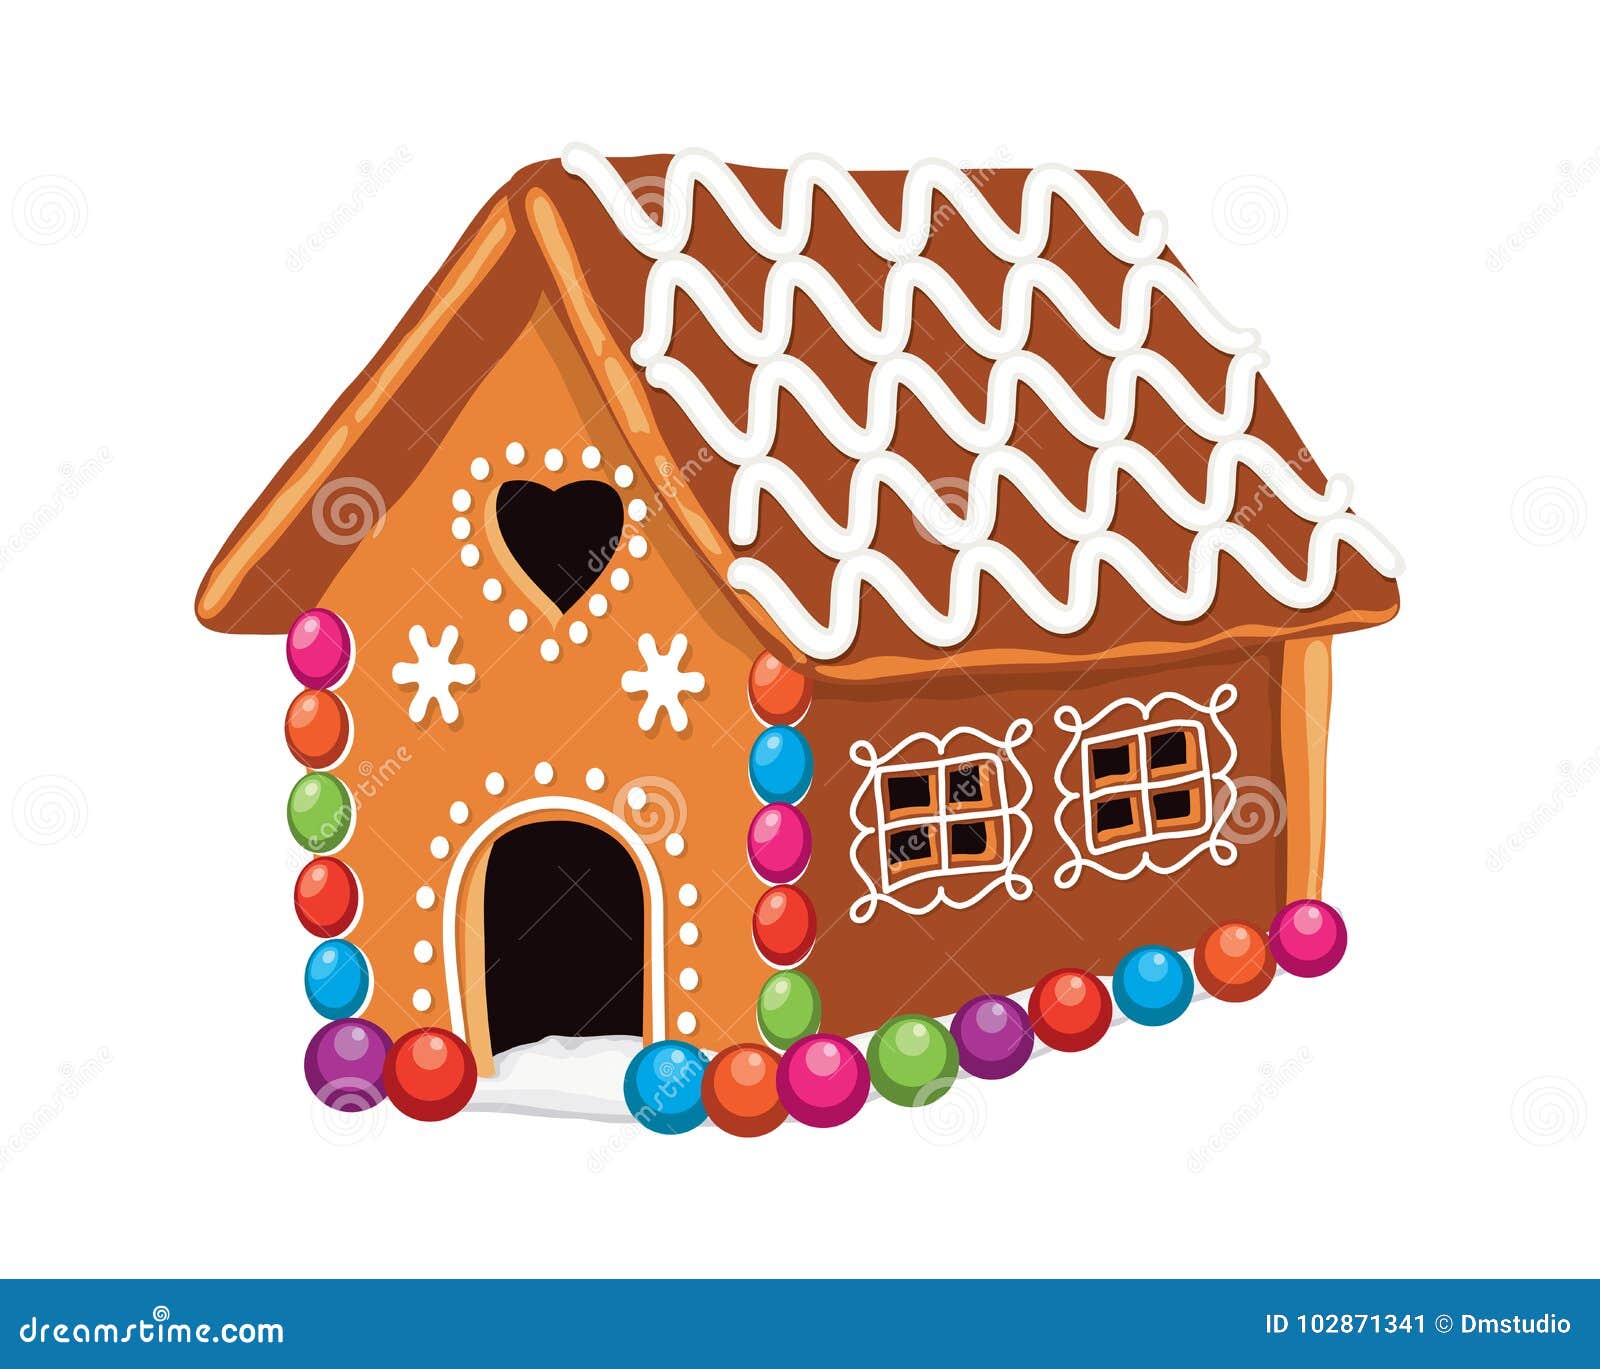 Xmas colorful gingerbread house with sugar icing decoration christmas holiday food background sweet ginger bread dessert eps10 illustration vector